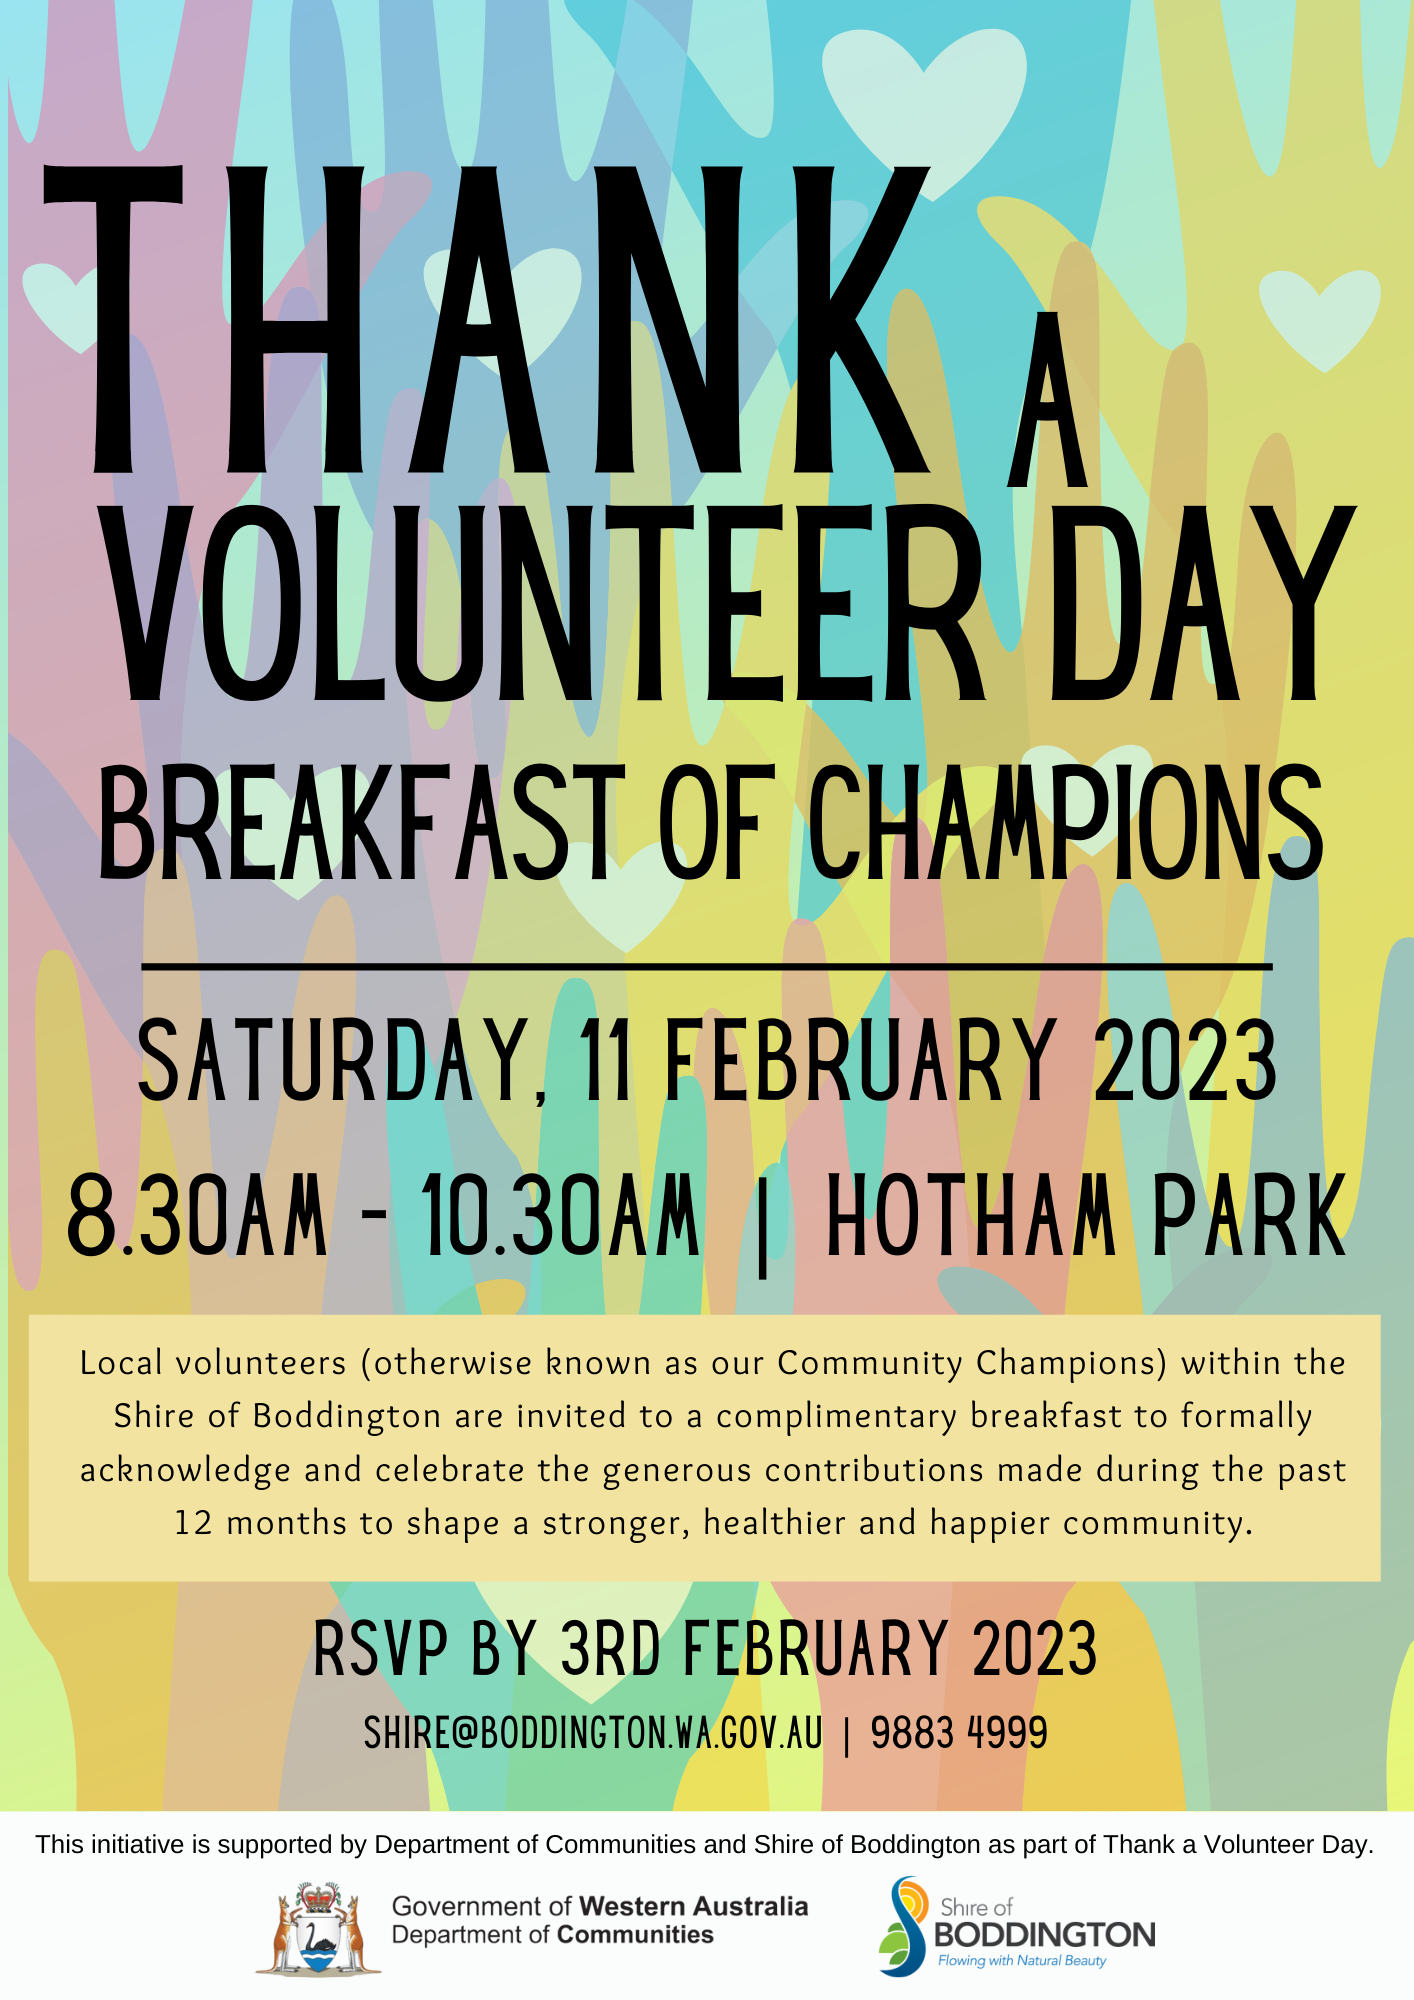 Thank a Volunteer Day: Breakfast of Champions